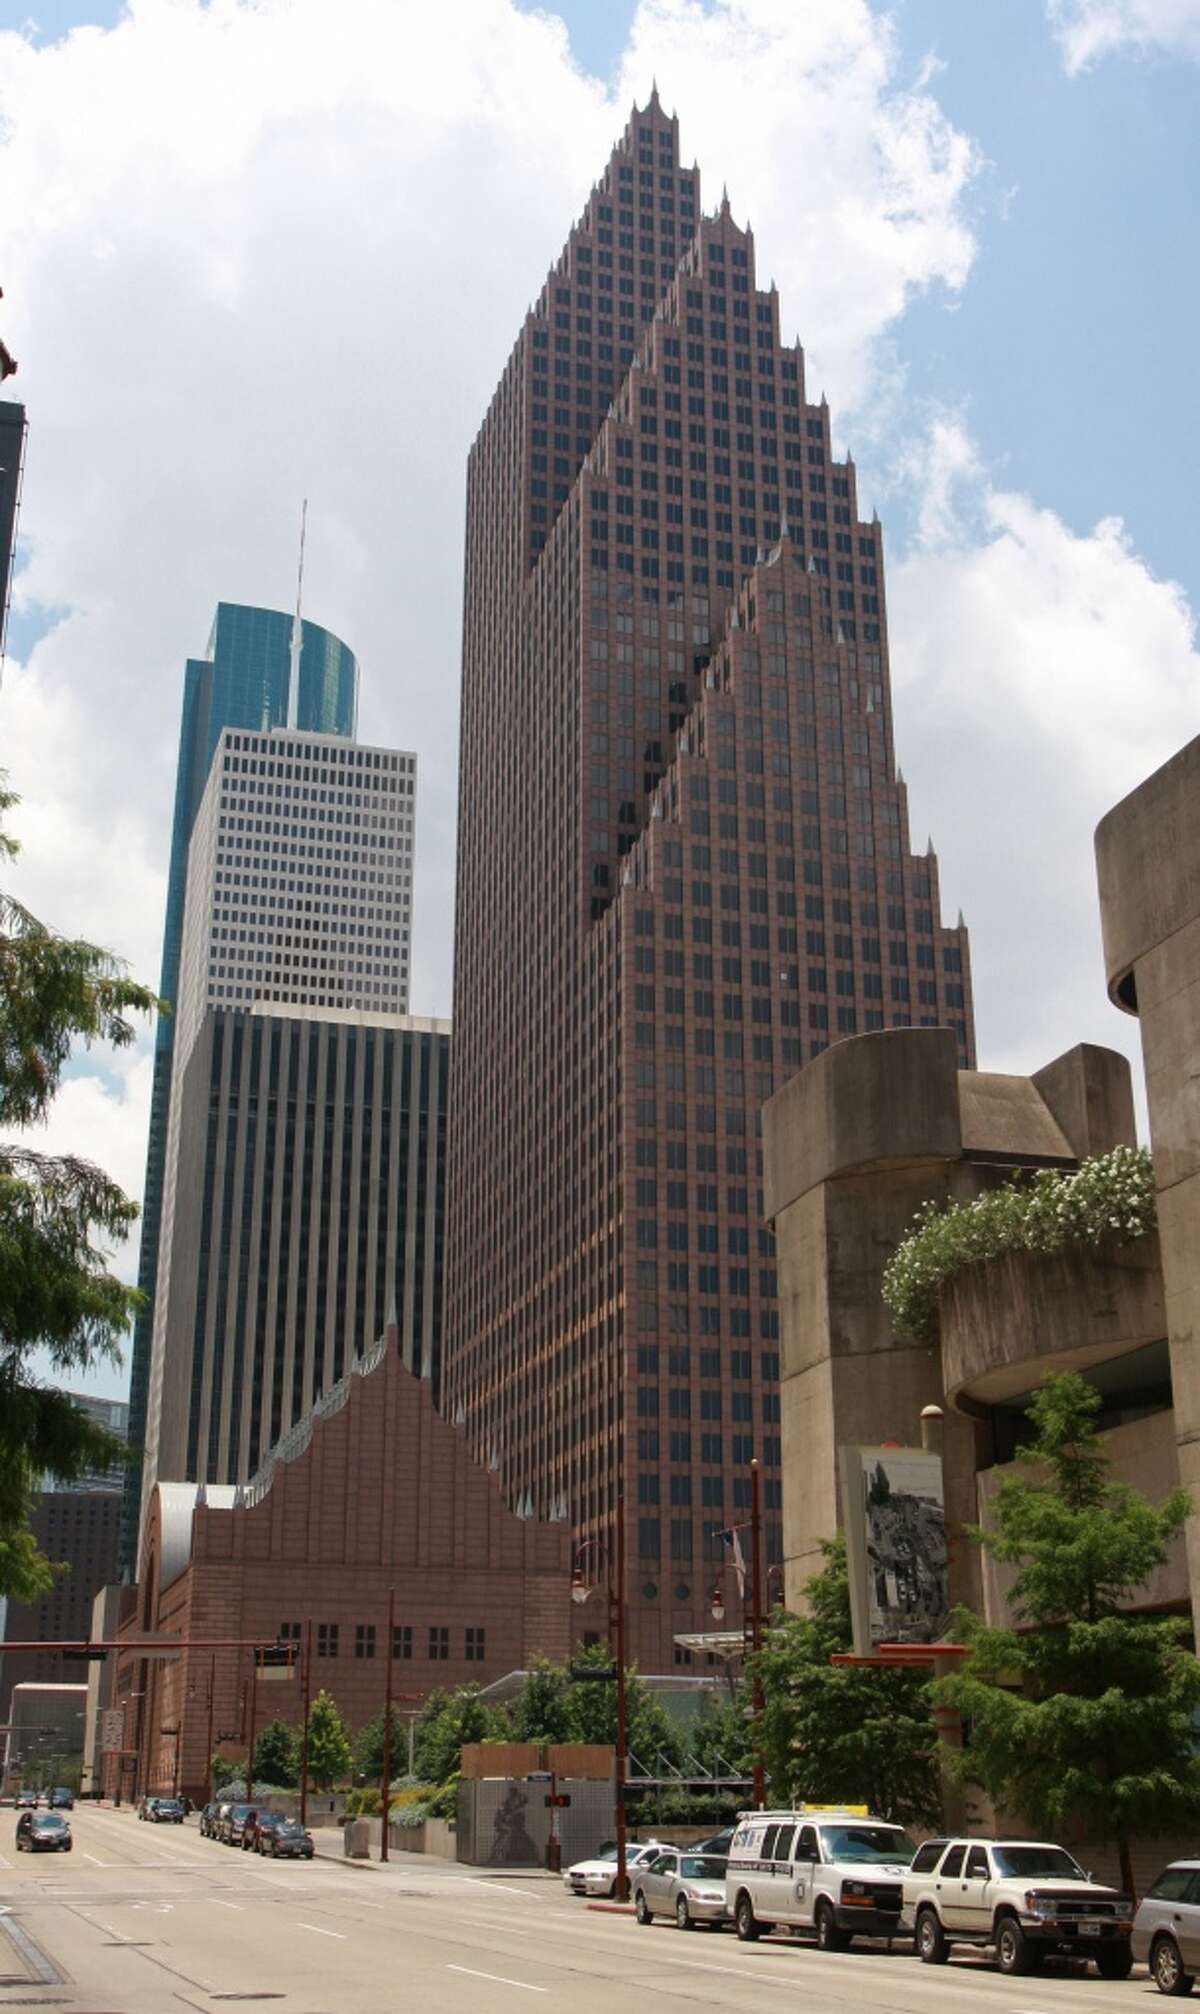 (For the Chronicle/Gary Fountain, July 18, 2008) The Bank of America Center at 700 Louisiana.